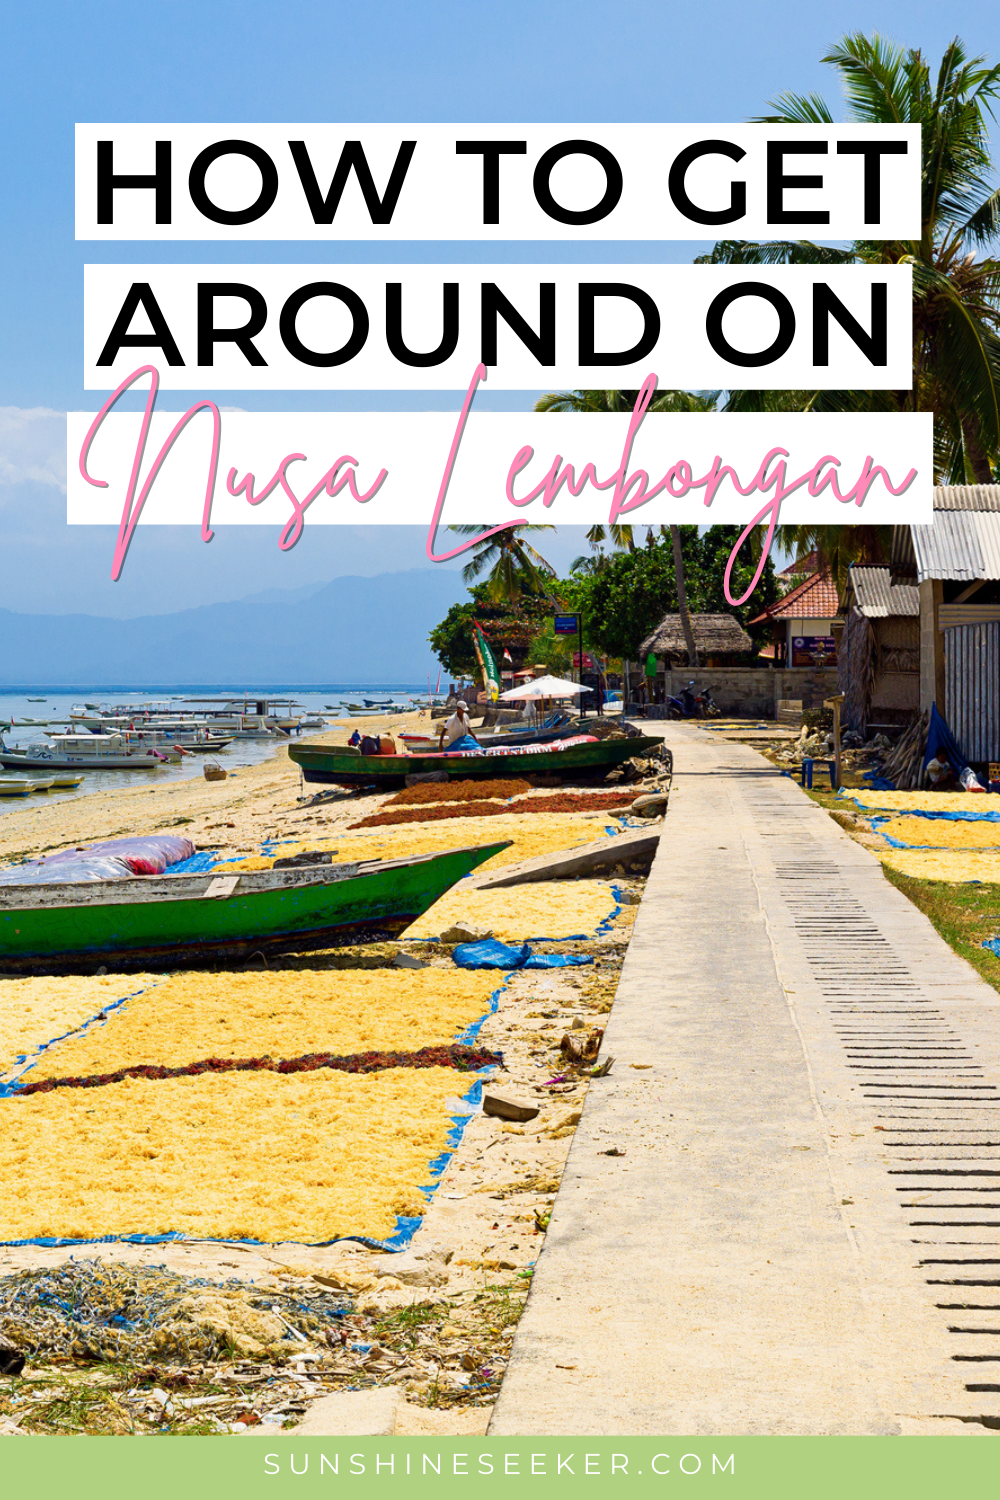 How to get around on Nusa Lembongan. Everything you need to know about transportation on Nusa Lembongan, Indonesia. You can also book your fast boat tickets from Bali in advance here.